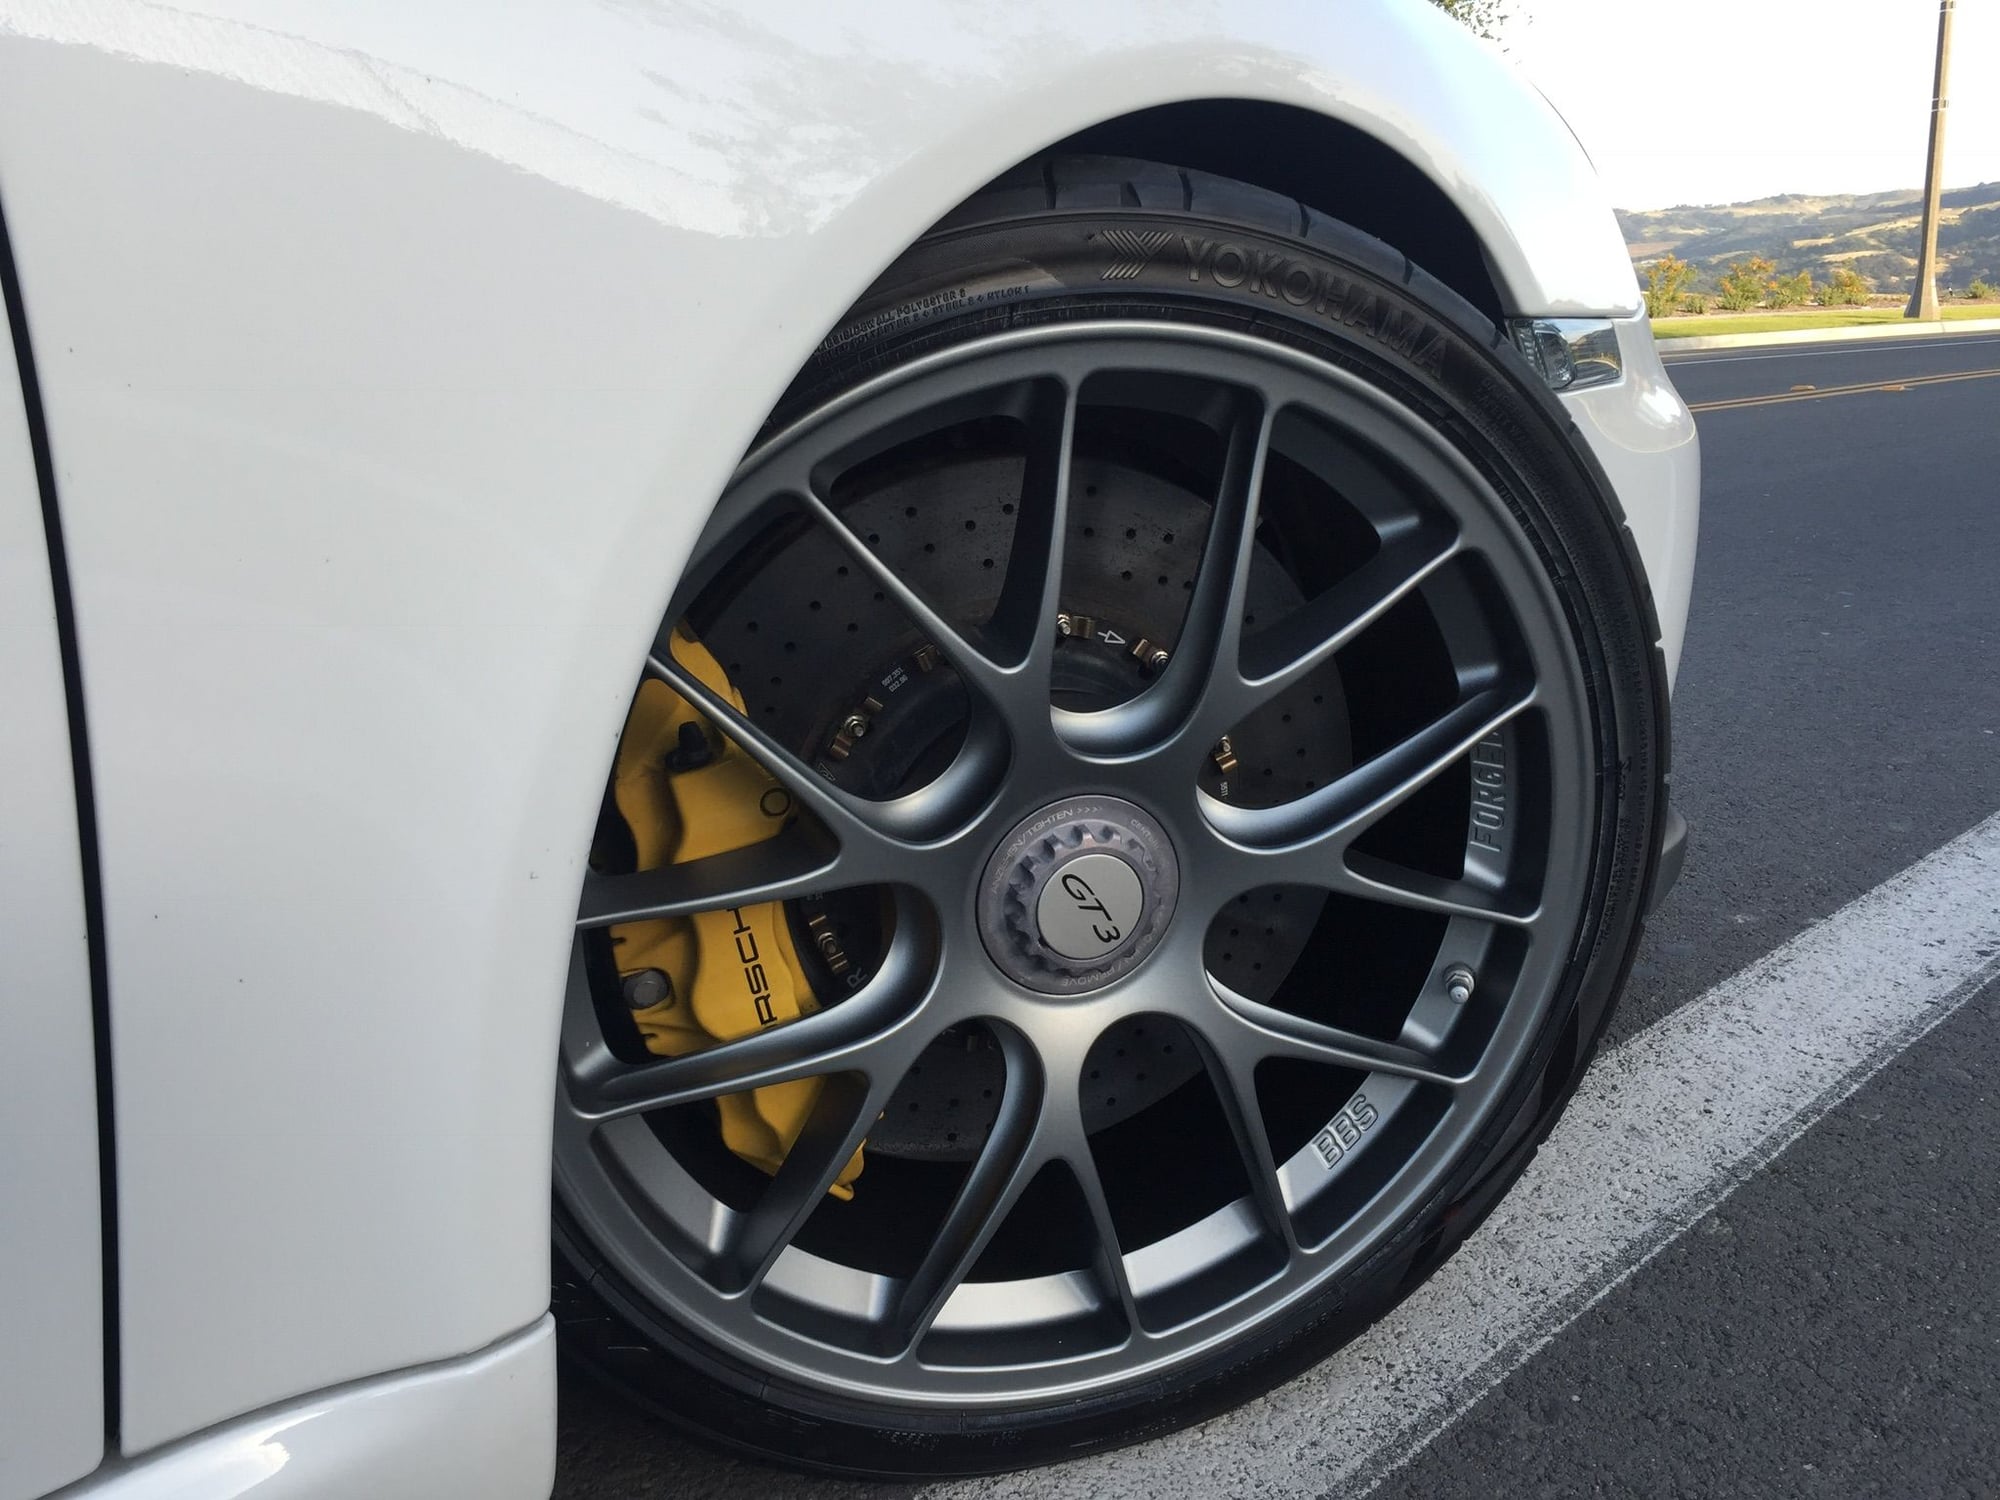 Wheels and Tires/Axles - 19" Forged BBS Monoblock Racing Wheels - Centerlock - Used - 2010 to 2011 Porsche 911 - Rancho Mission Viejo, CA 92694, United States